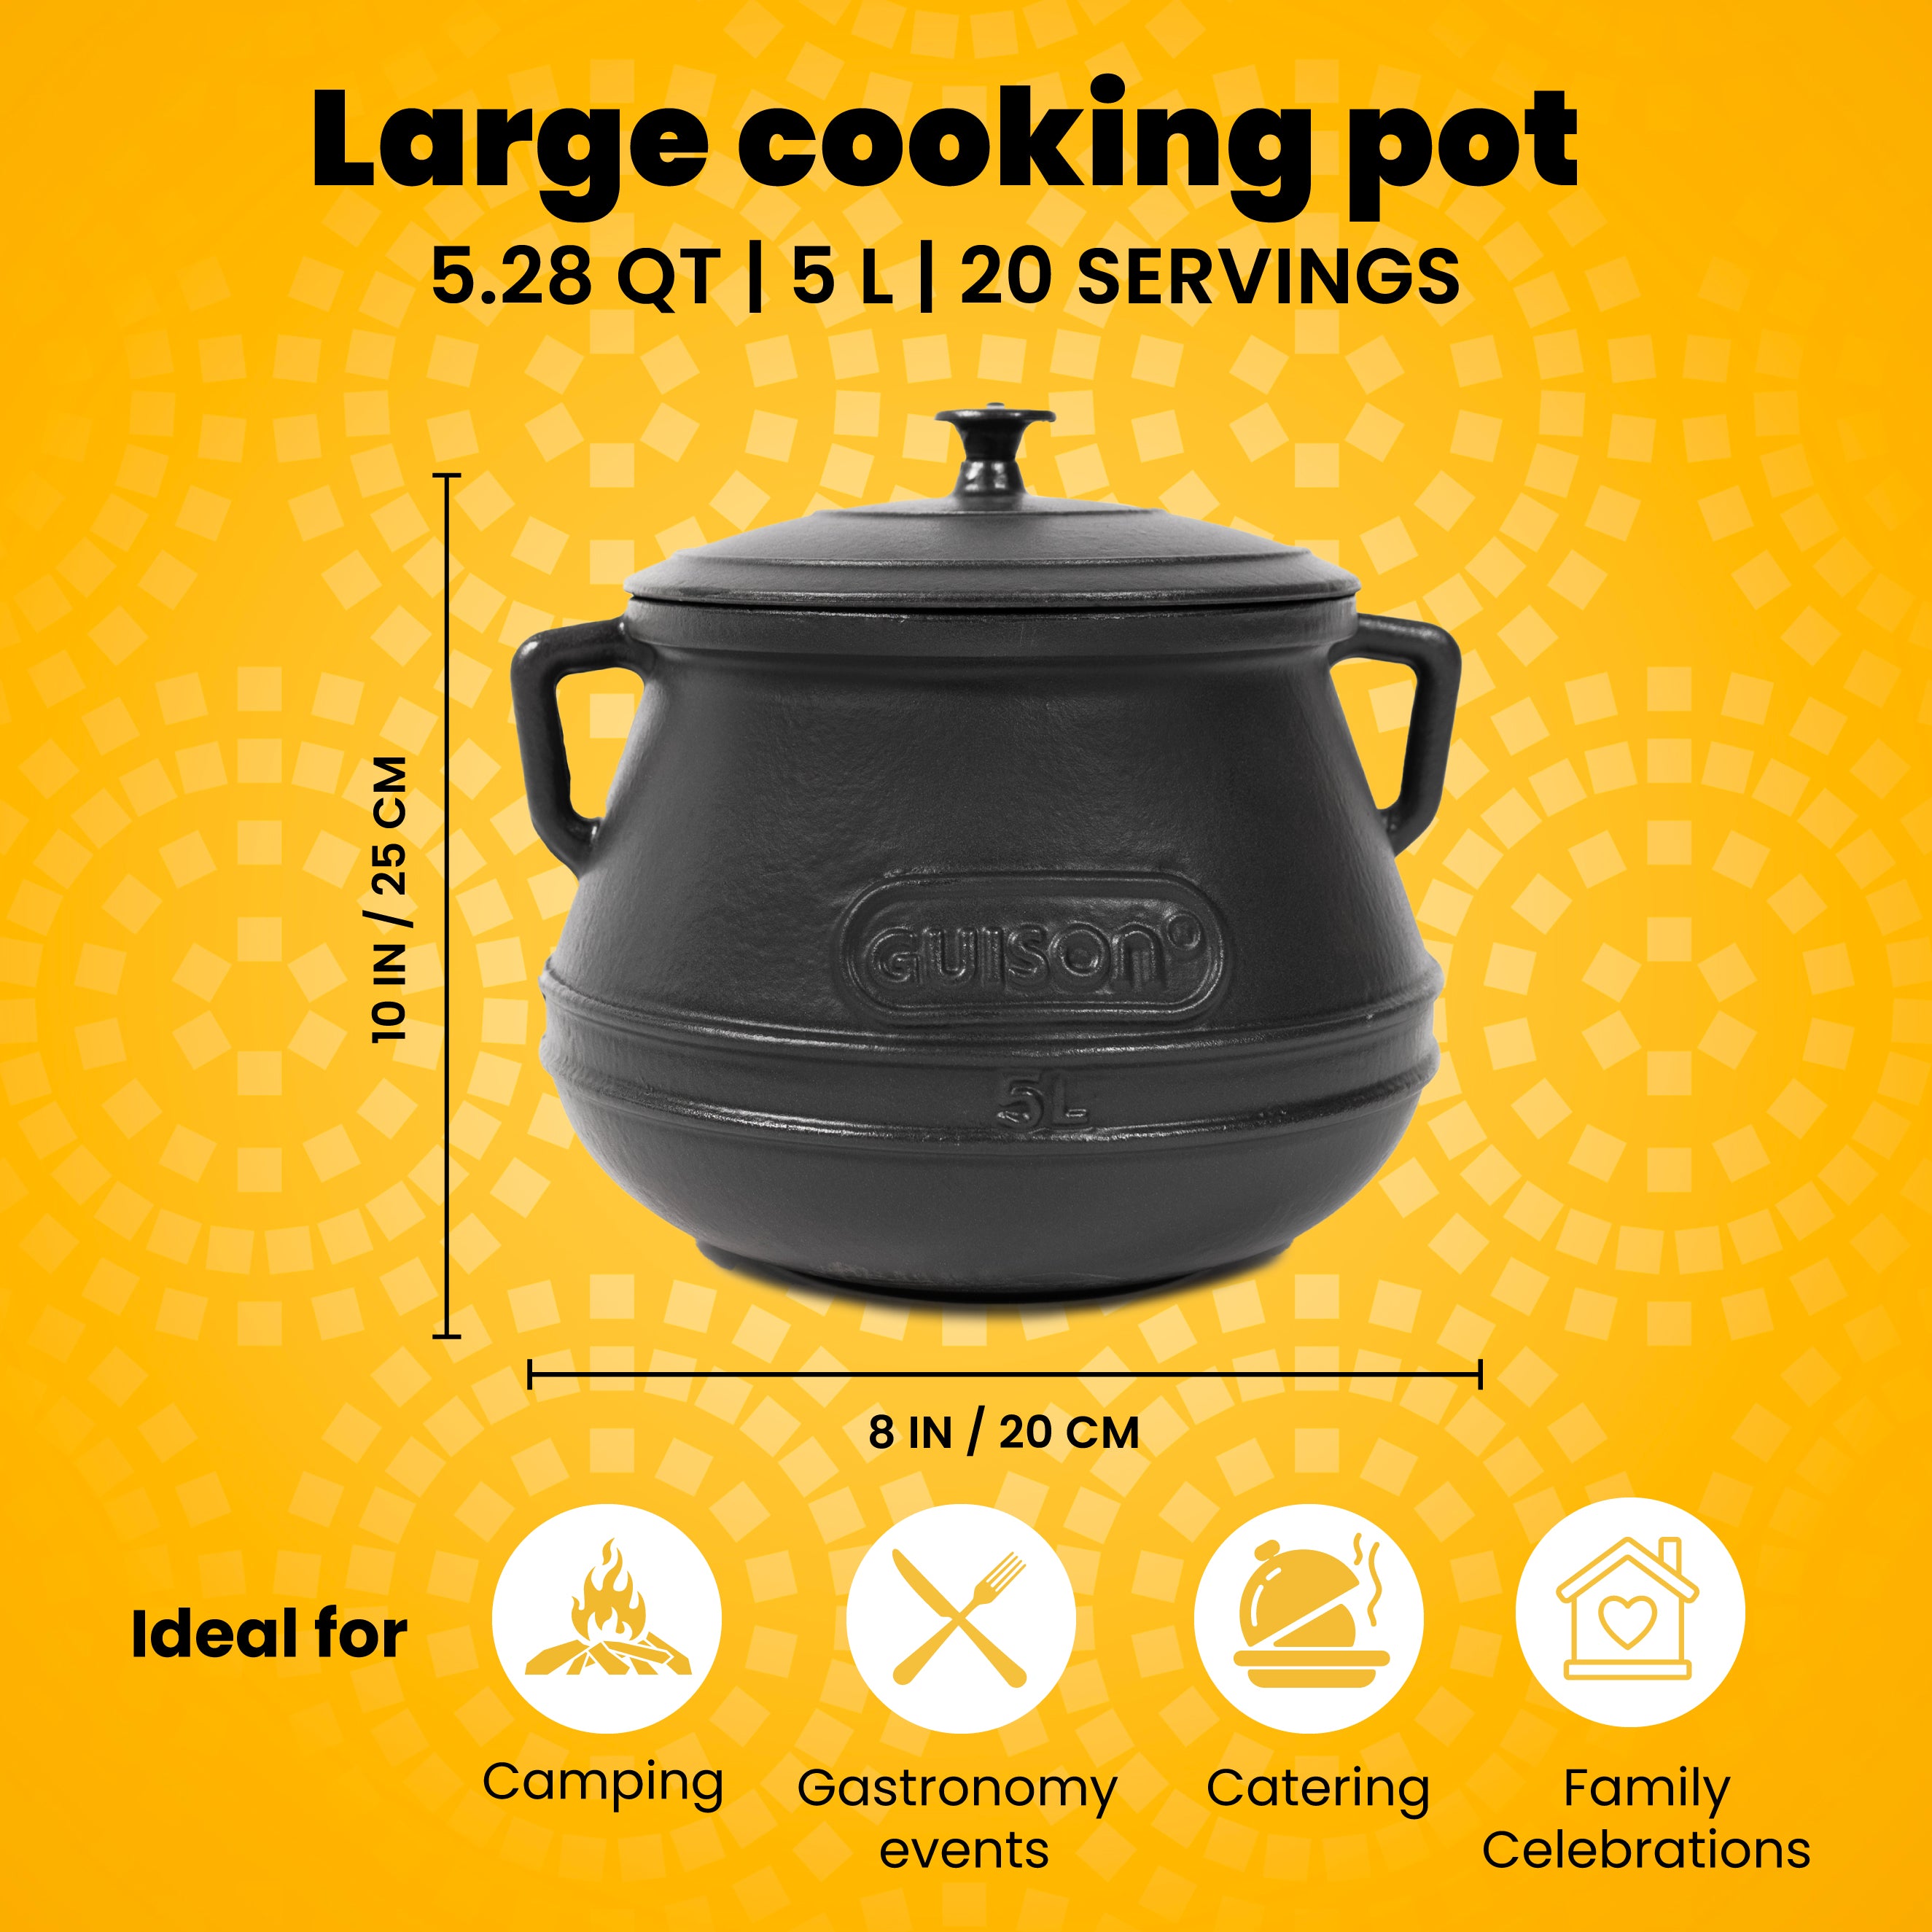 Cauldron Cast Iron | Oven Pot With Lid| Stock Pot for Stews, Beans, Soups | Perfect for Professional and Domestic Use | 2 Servings | 2.11QT/2L |